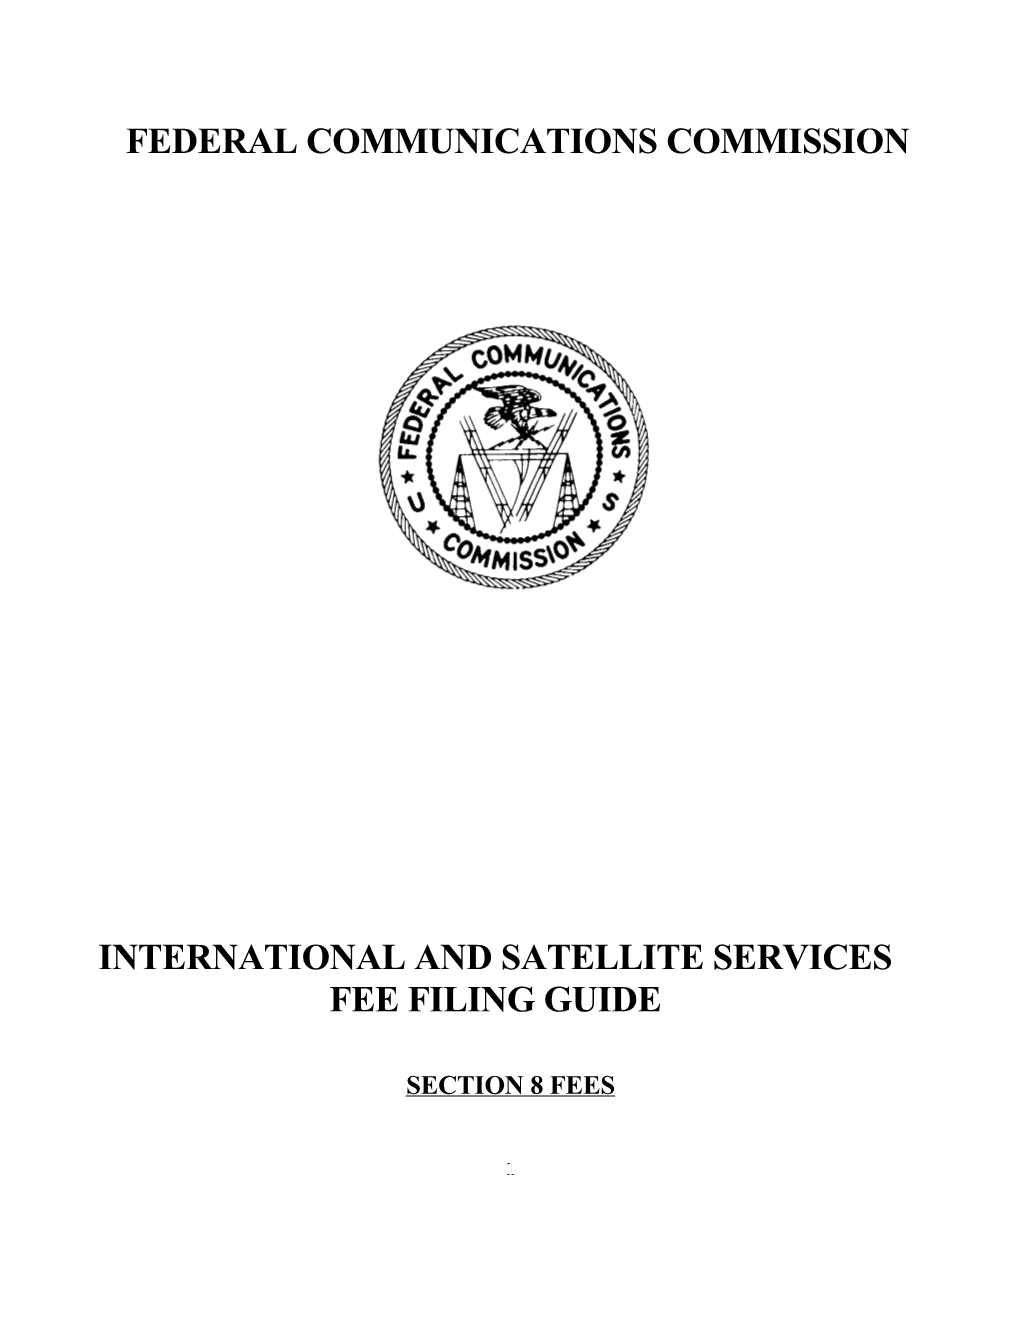 International and Satellite Services